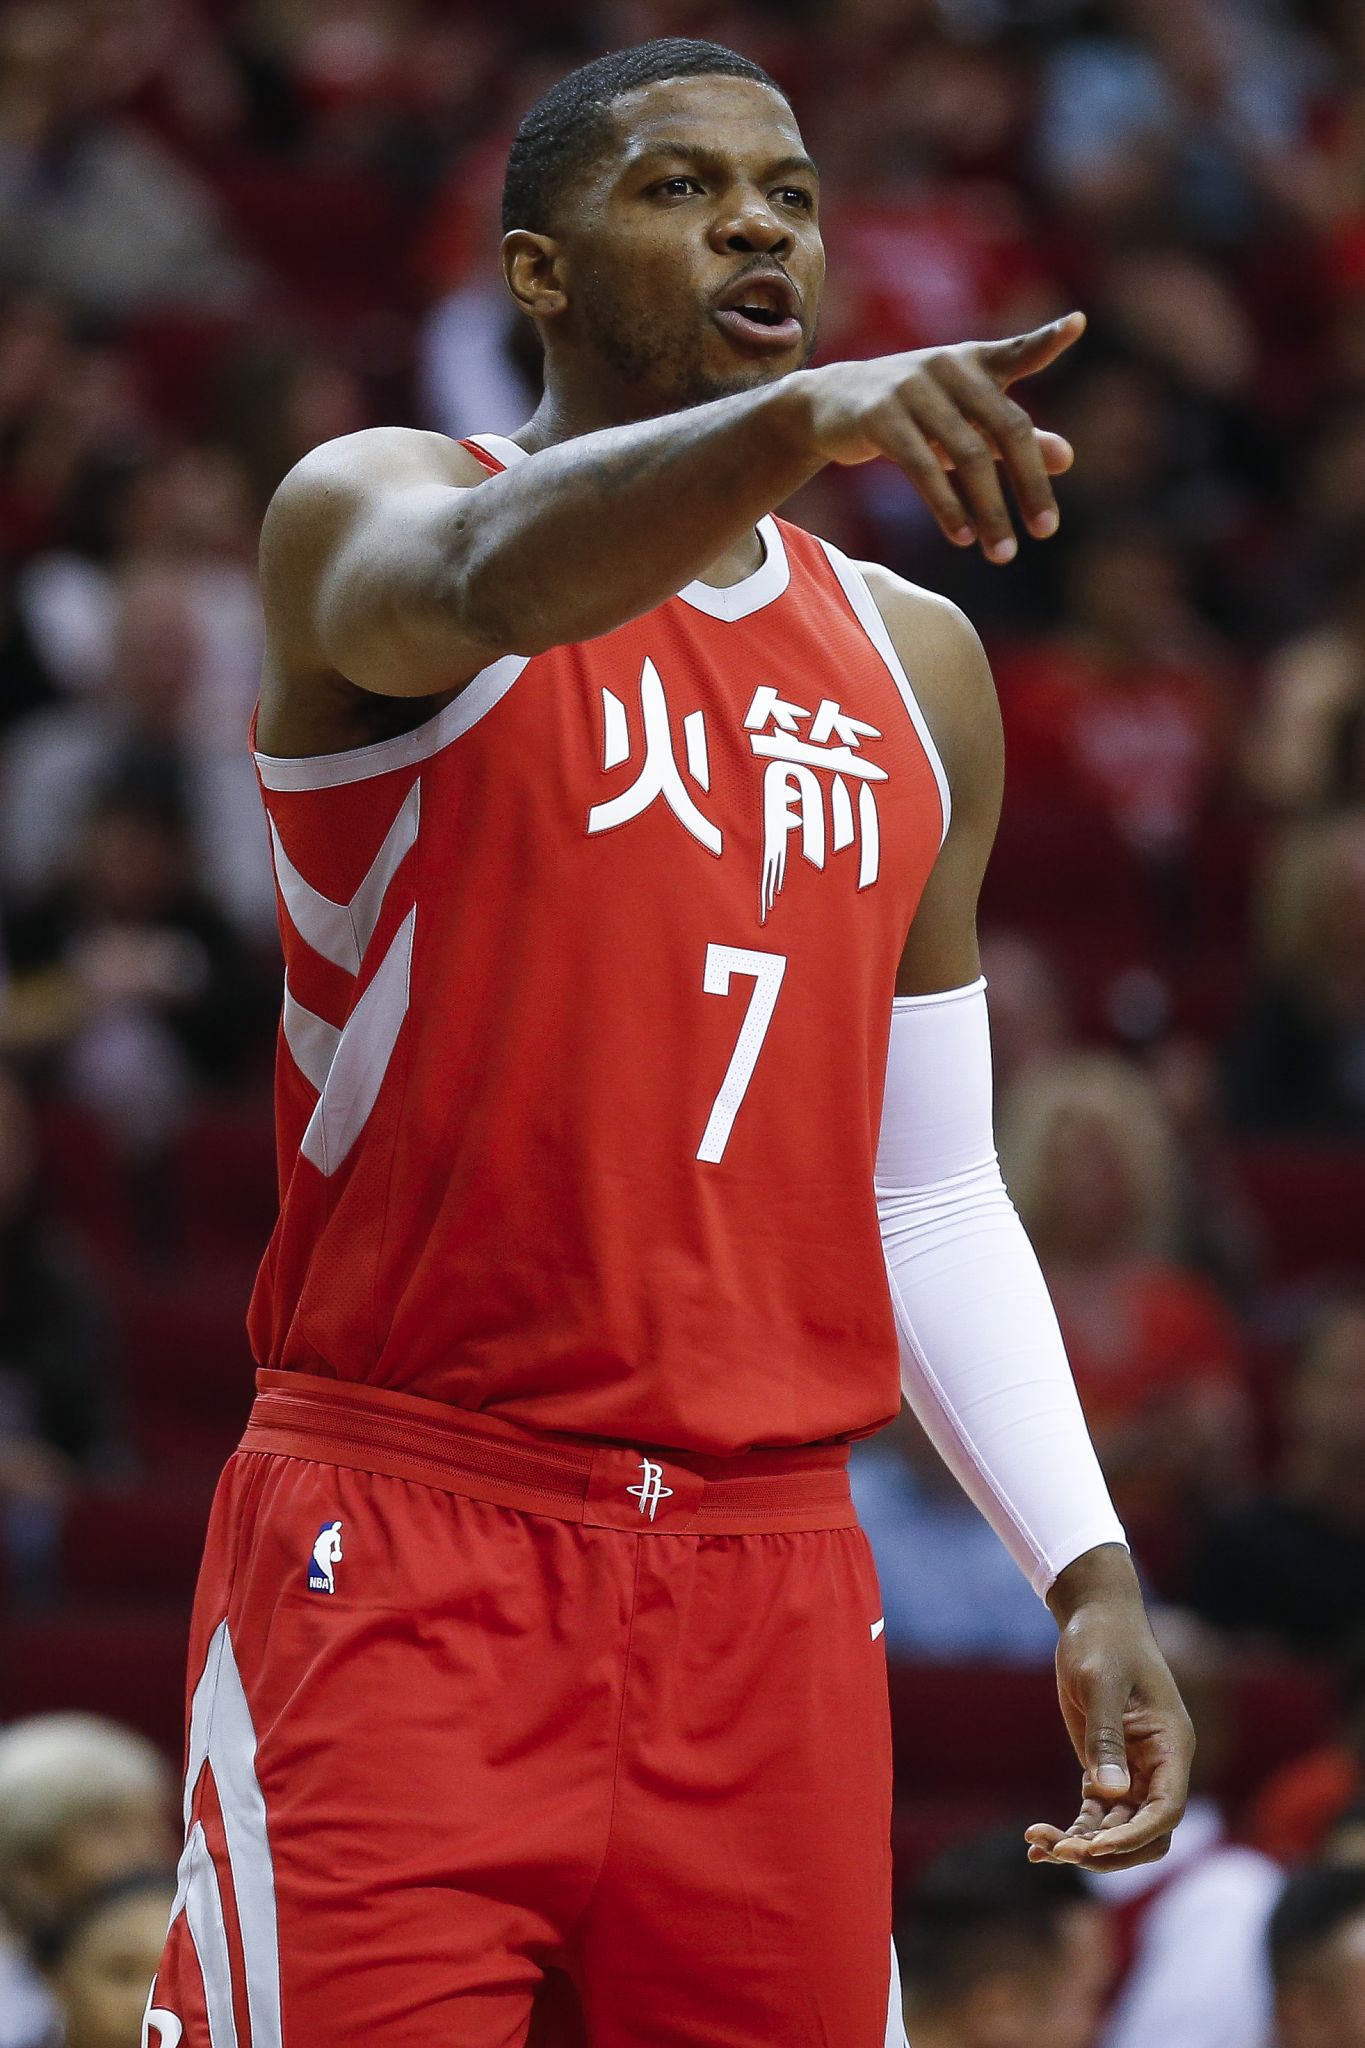 Rockets' Joe Johnson will play against former team for first time when moved midseason